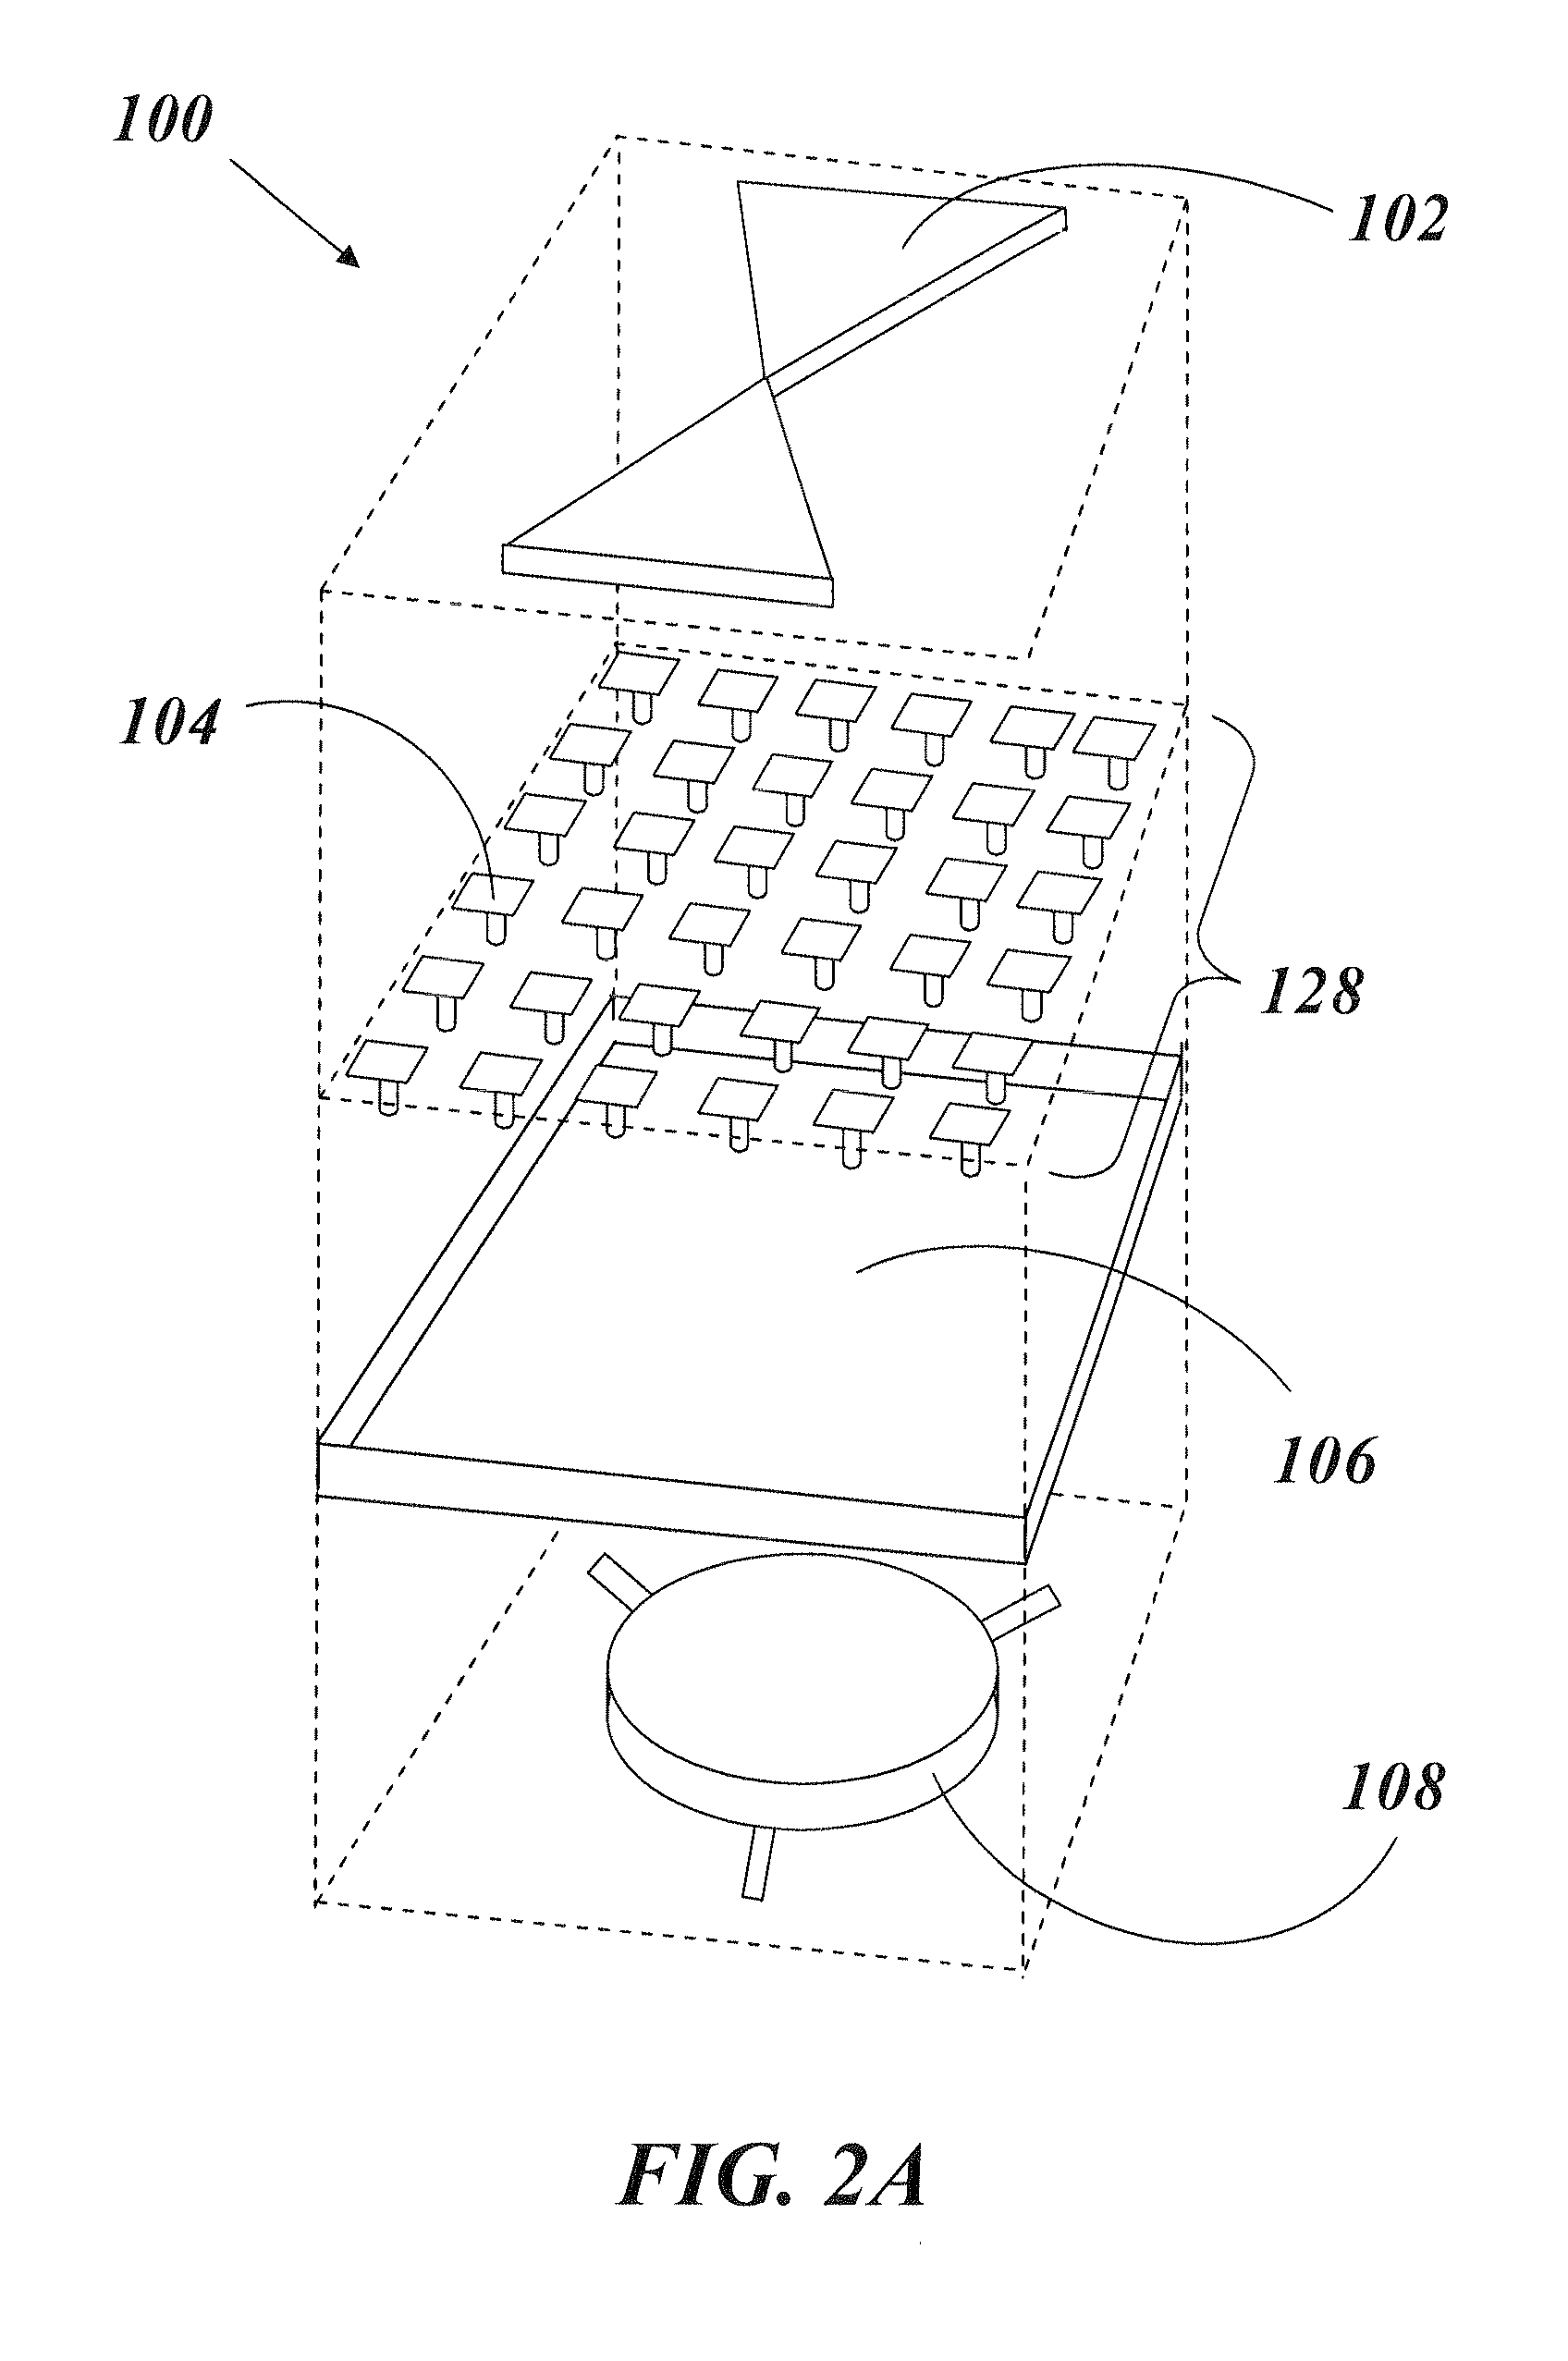 Antenna module having reduced size, high gain, and increased power efficiency